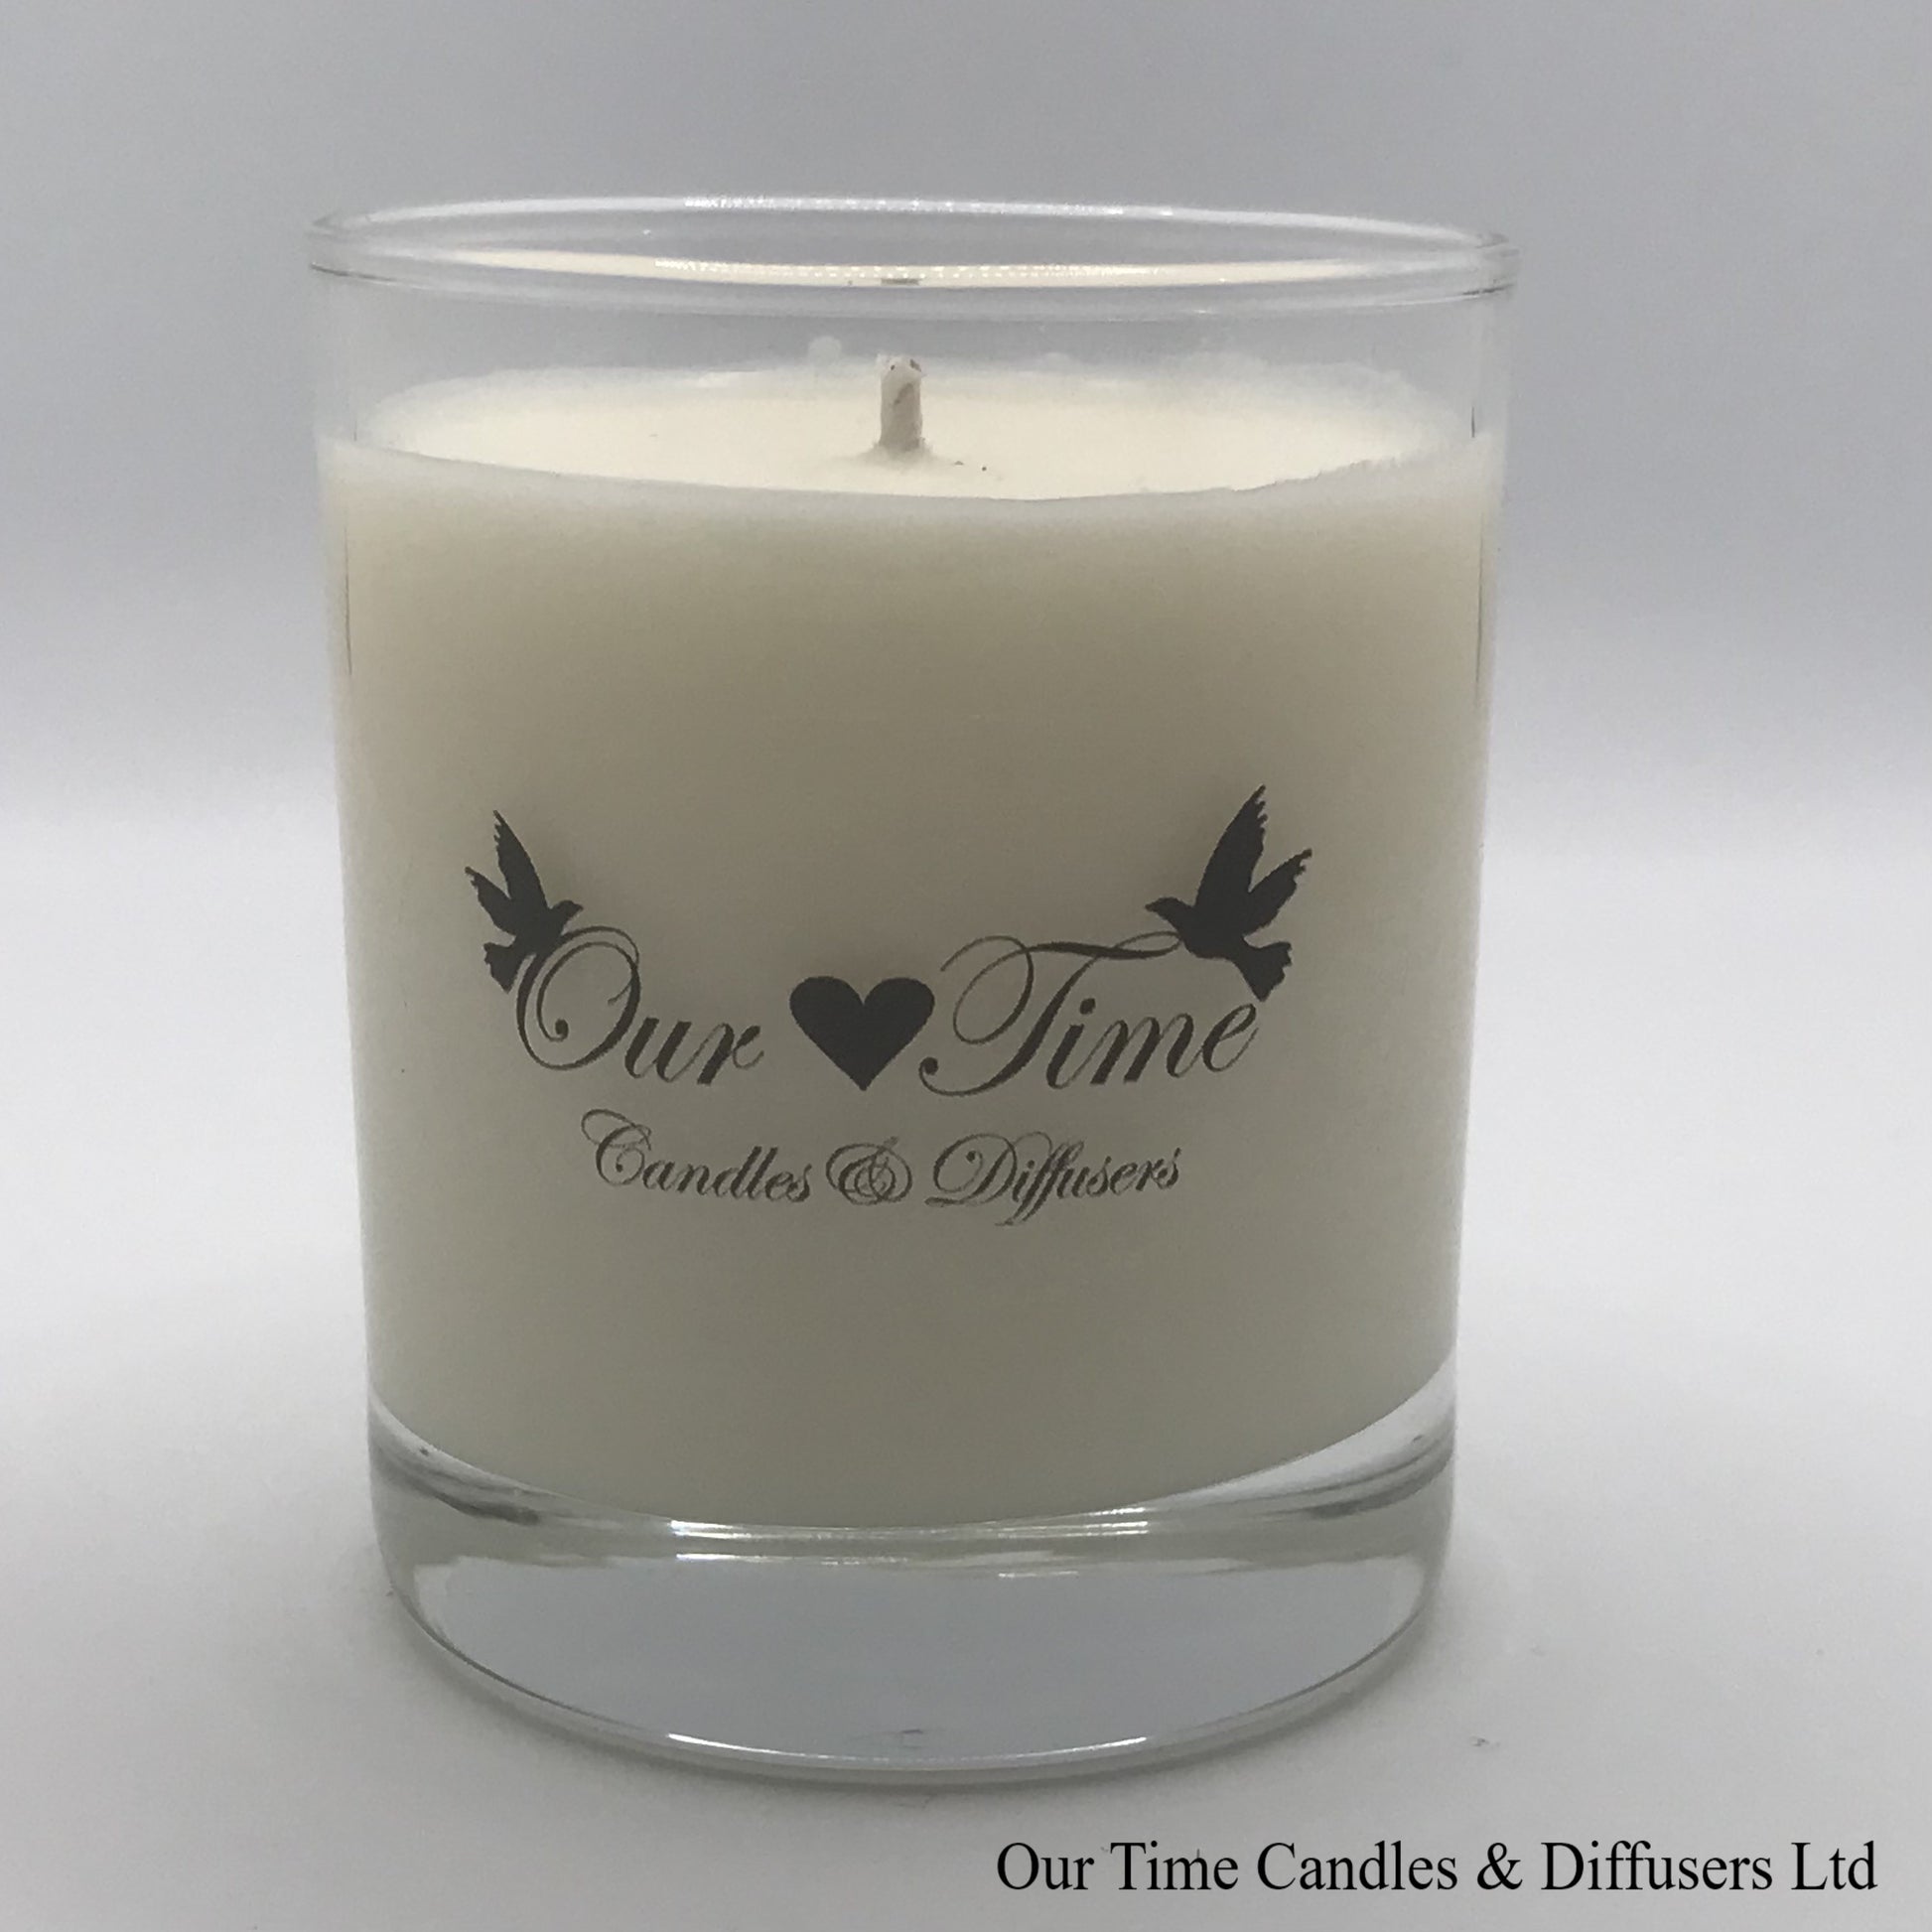 Relaxing scented wax filled candle